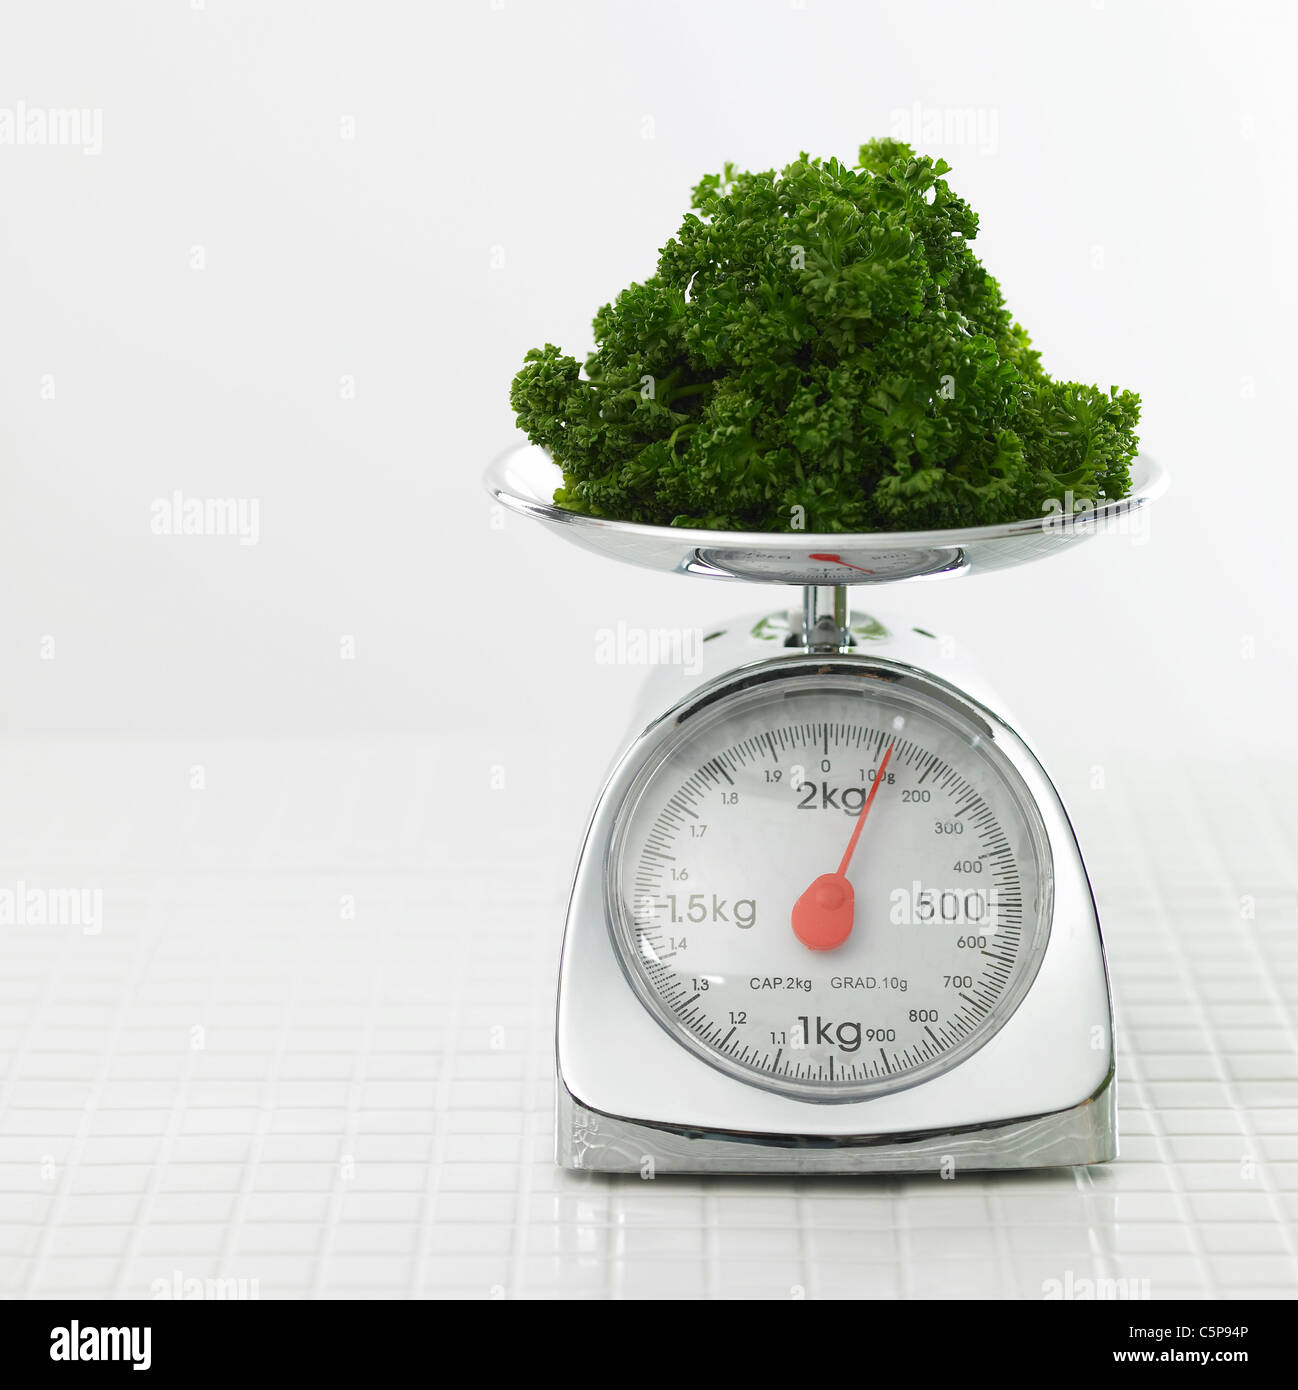 Broccoli on a scale Stock Photo